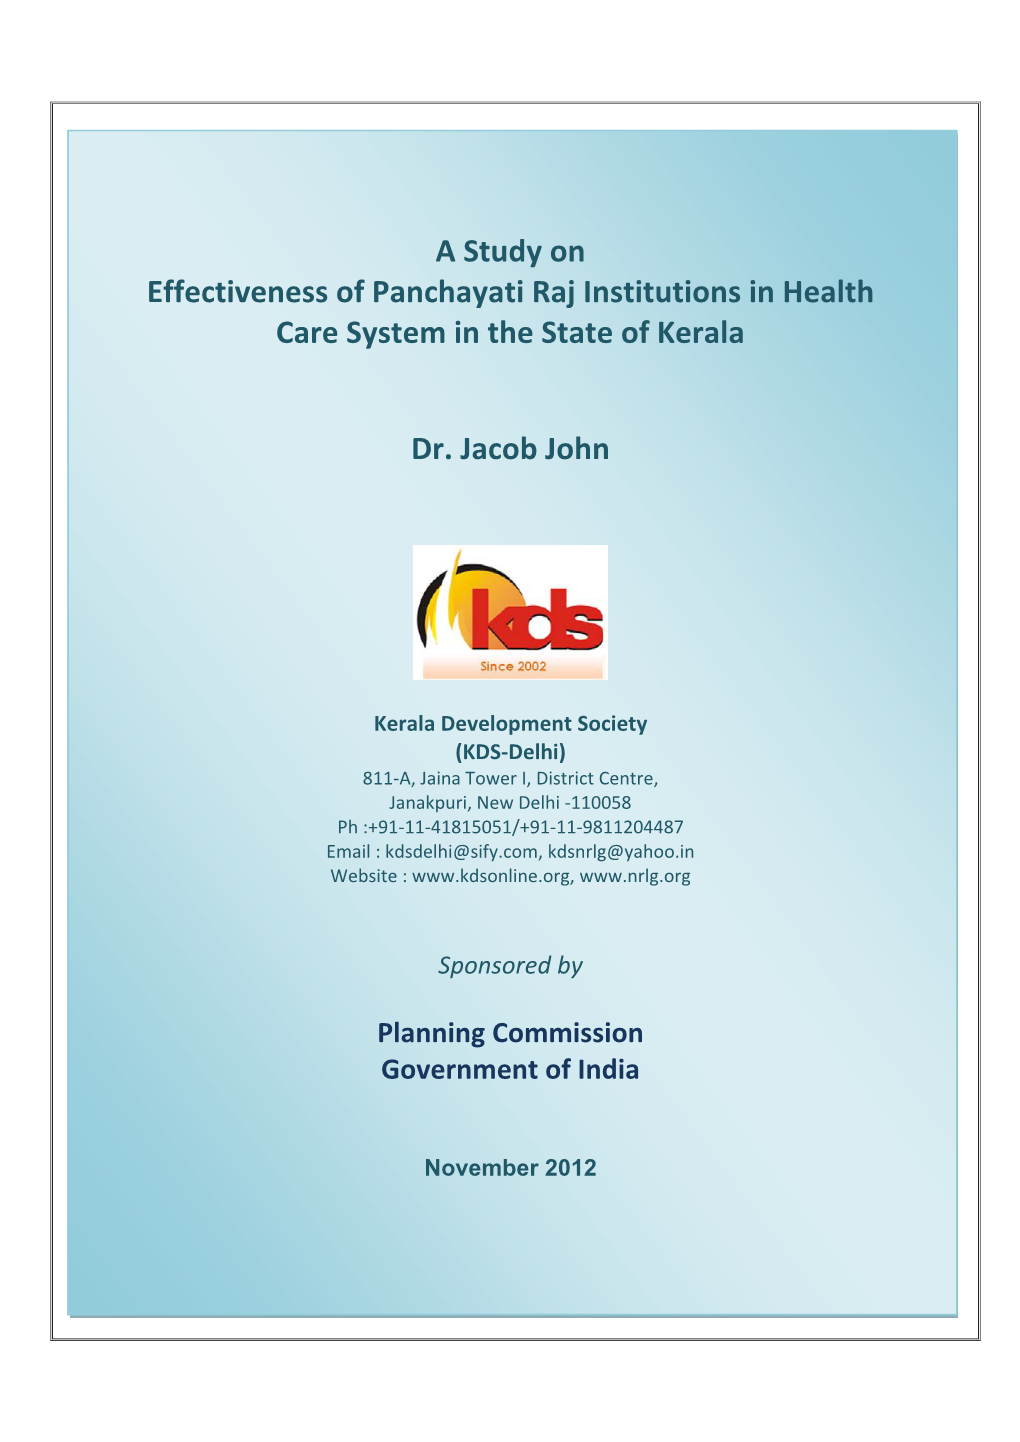 A Study on Effectiveness of Panchayati Raj Institutions in Health Care System in the State of Kerala